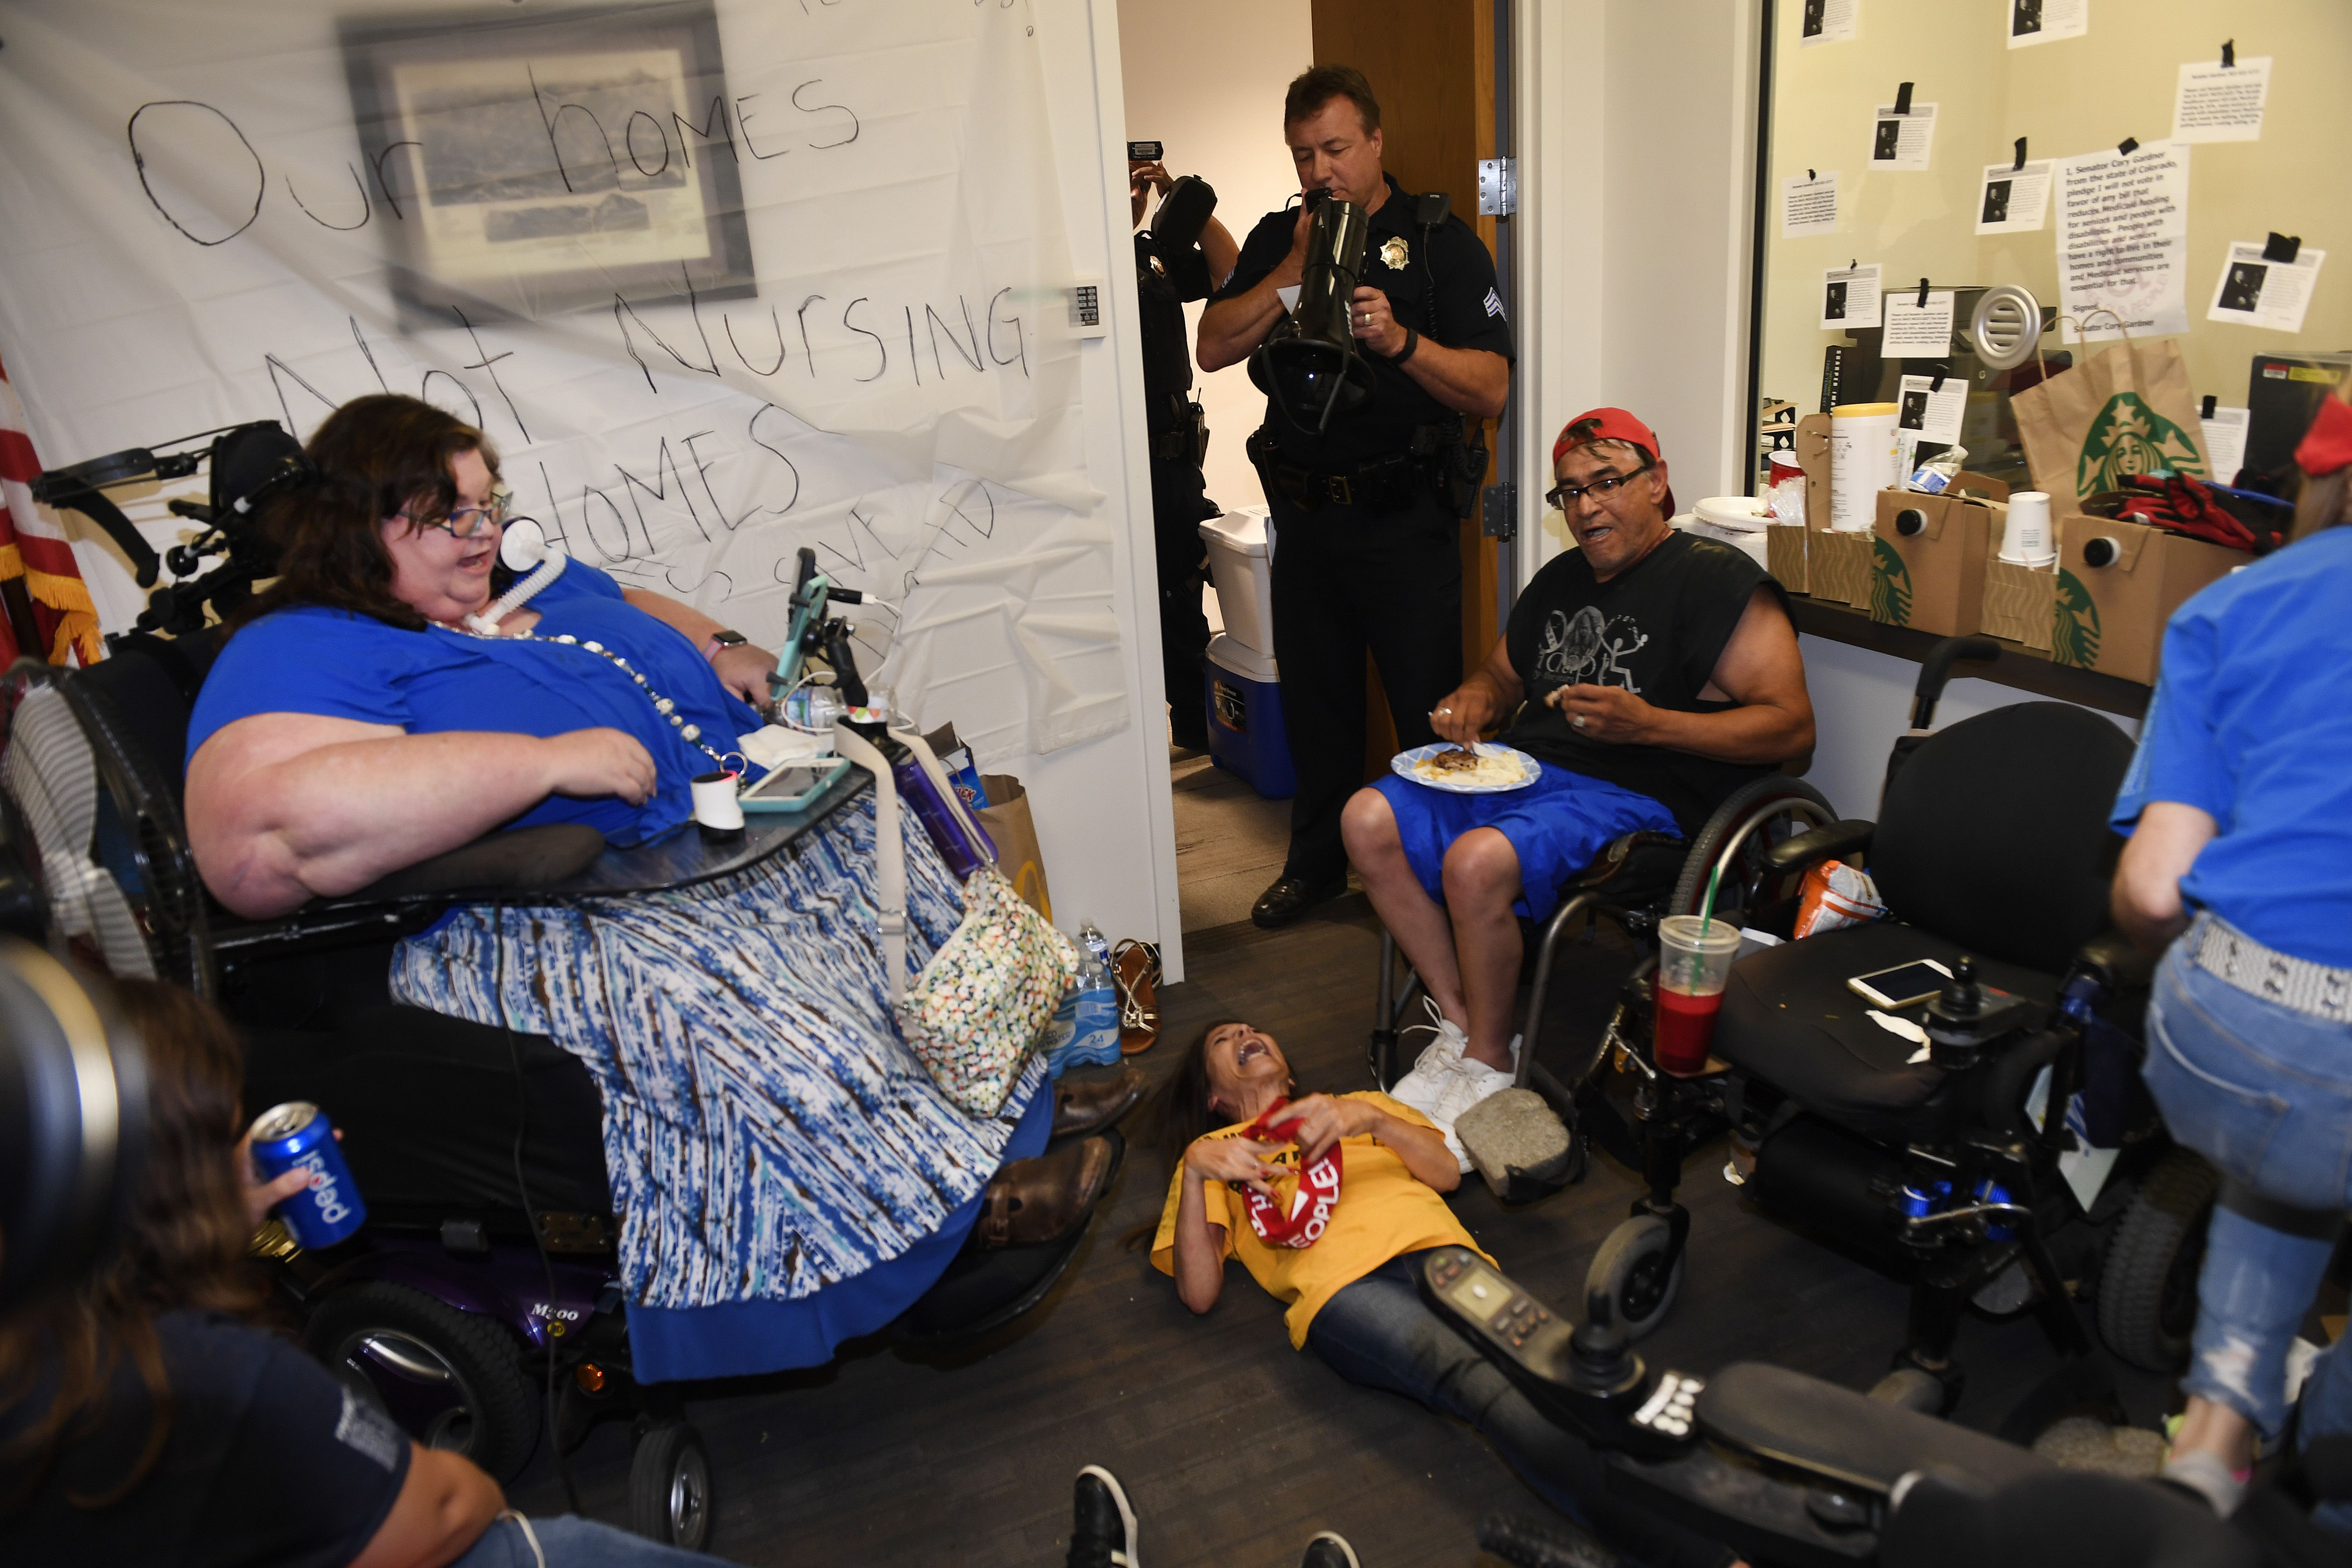 A group of people in wheelchairs, one lying on the ground, sits in a room surrounded by police.